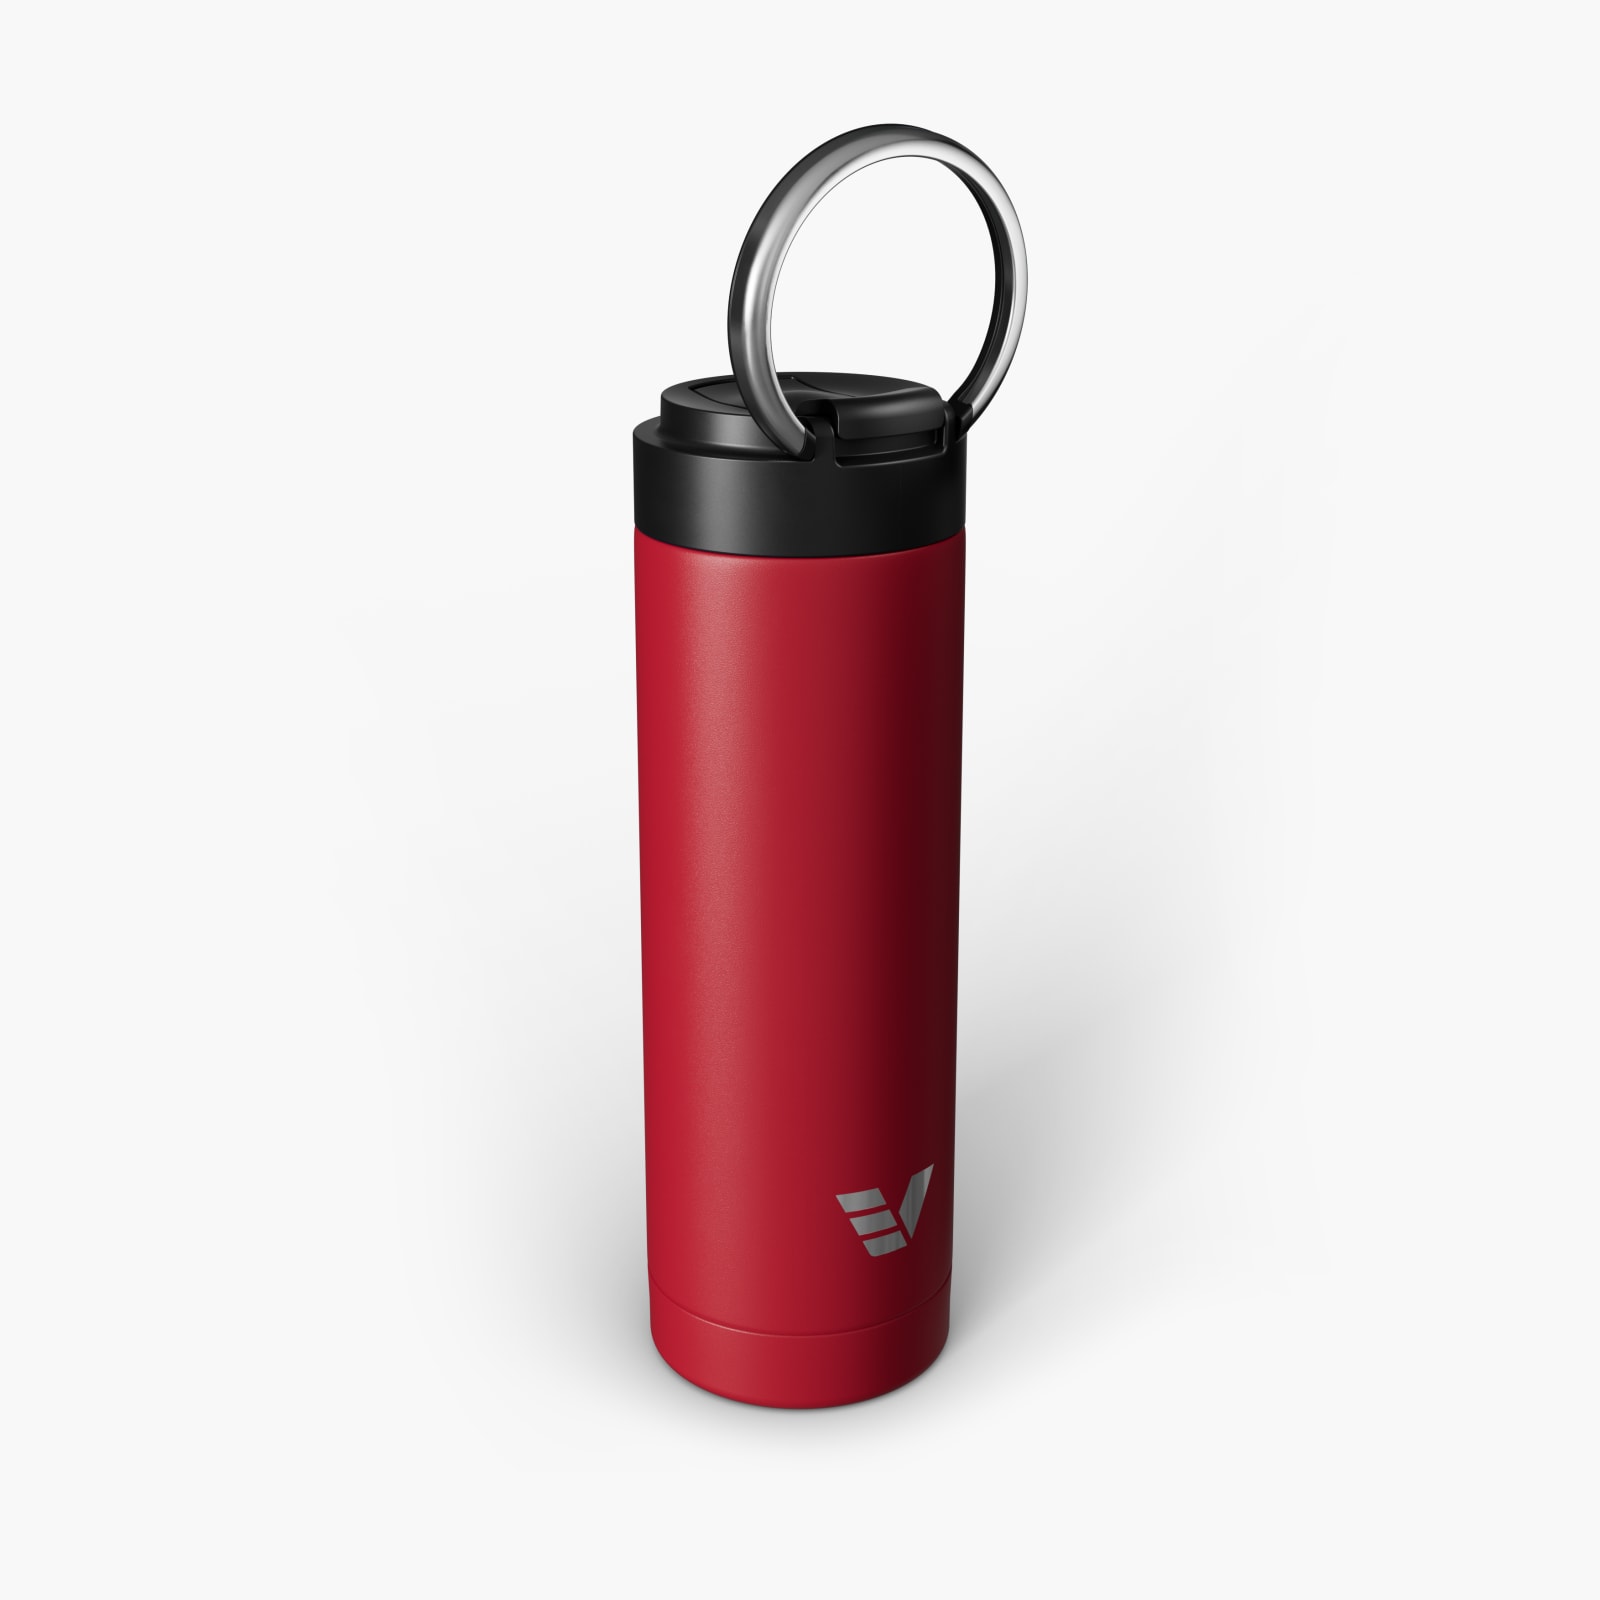 Ever Vessel Maxi Red Handle Extended